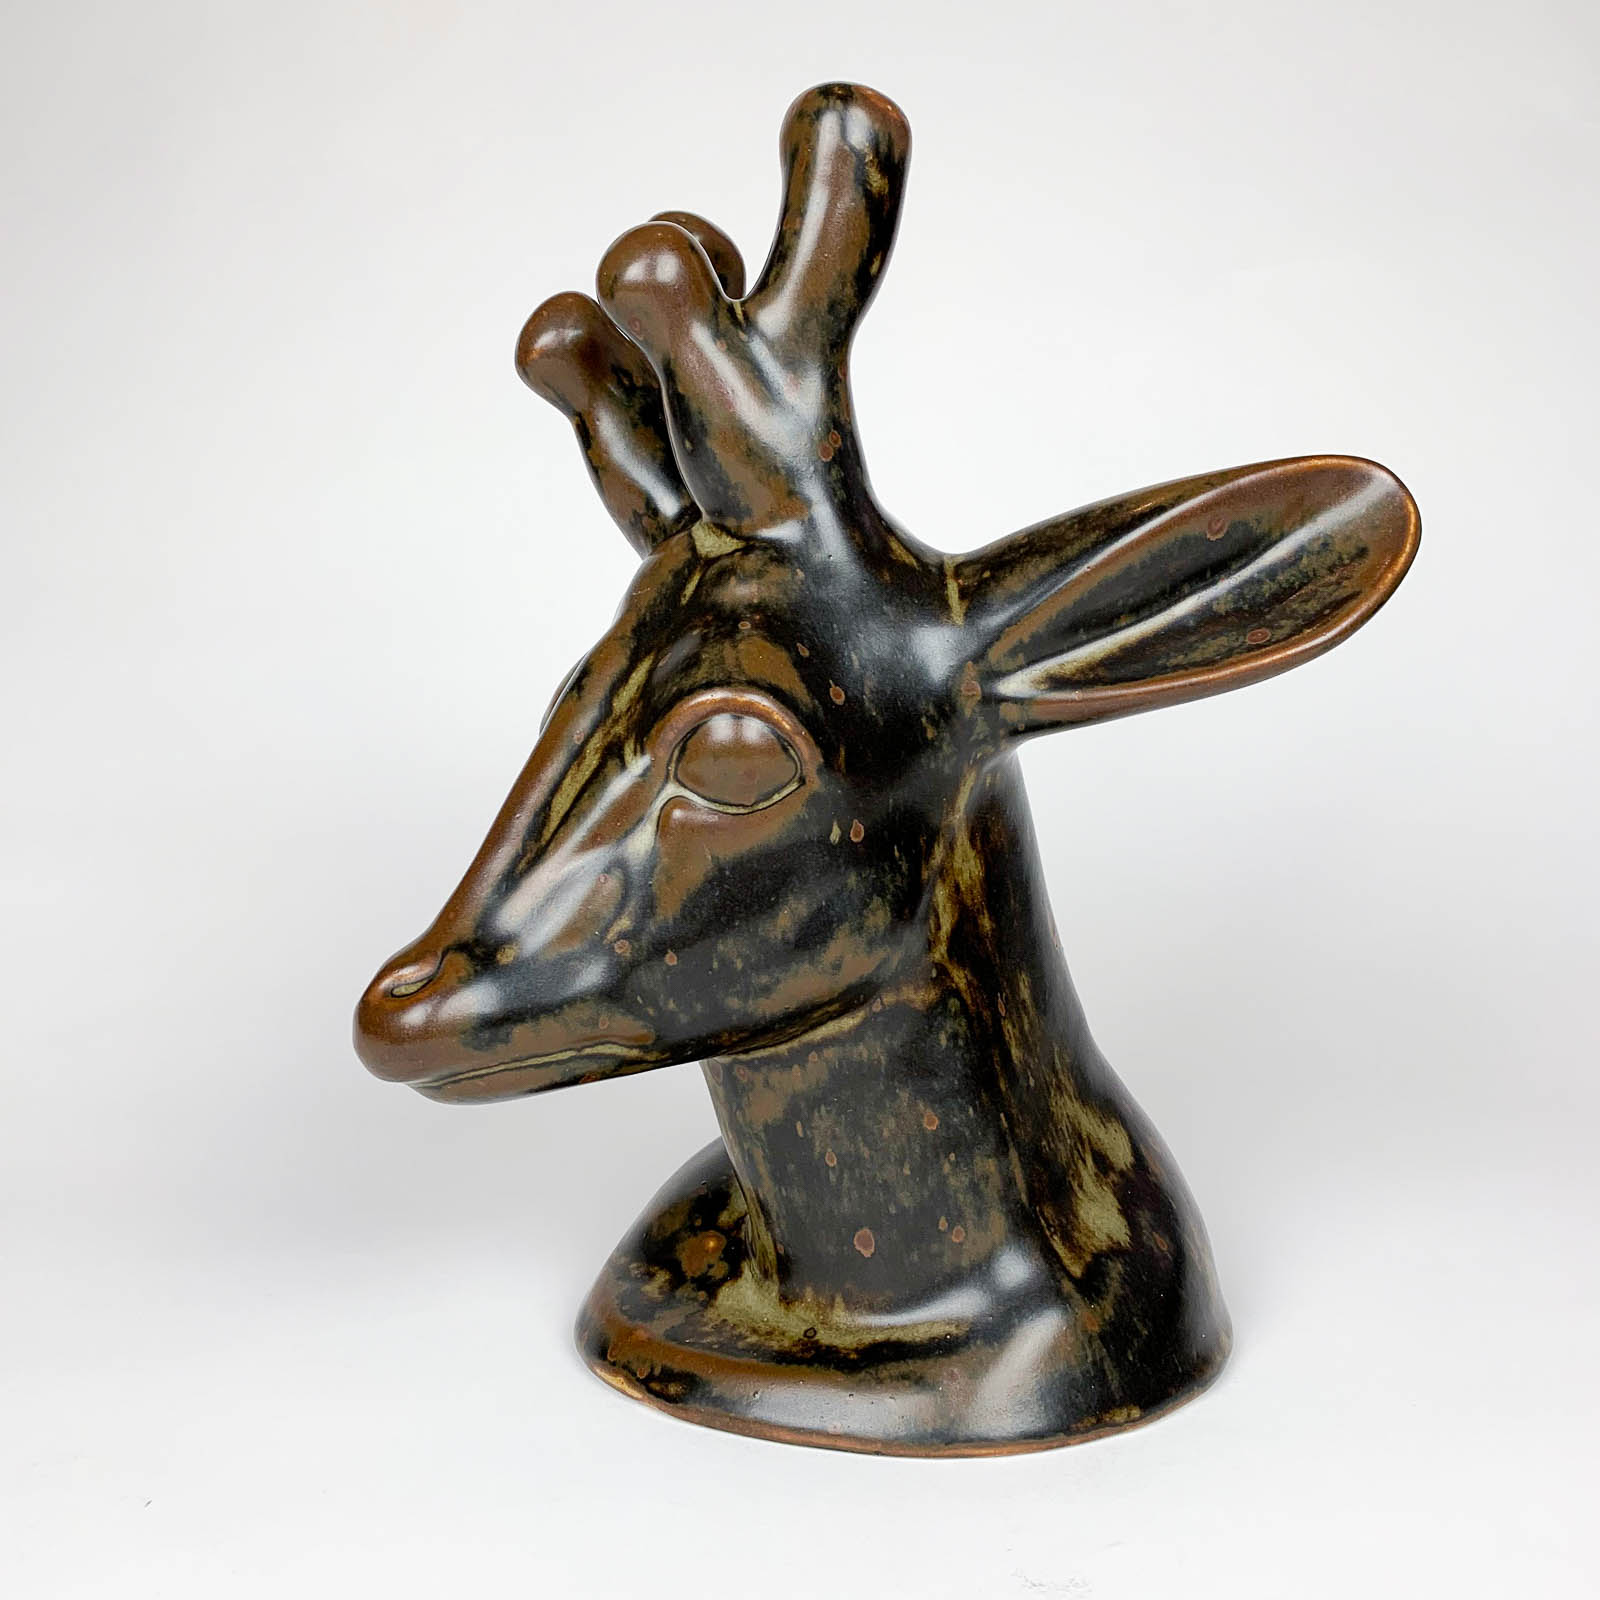 A stoneware Deerhead sculpture, model no: 20.803, sculpted by Axel Salto in 1946 and executed by Royal Copenhagen in 1950.